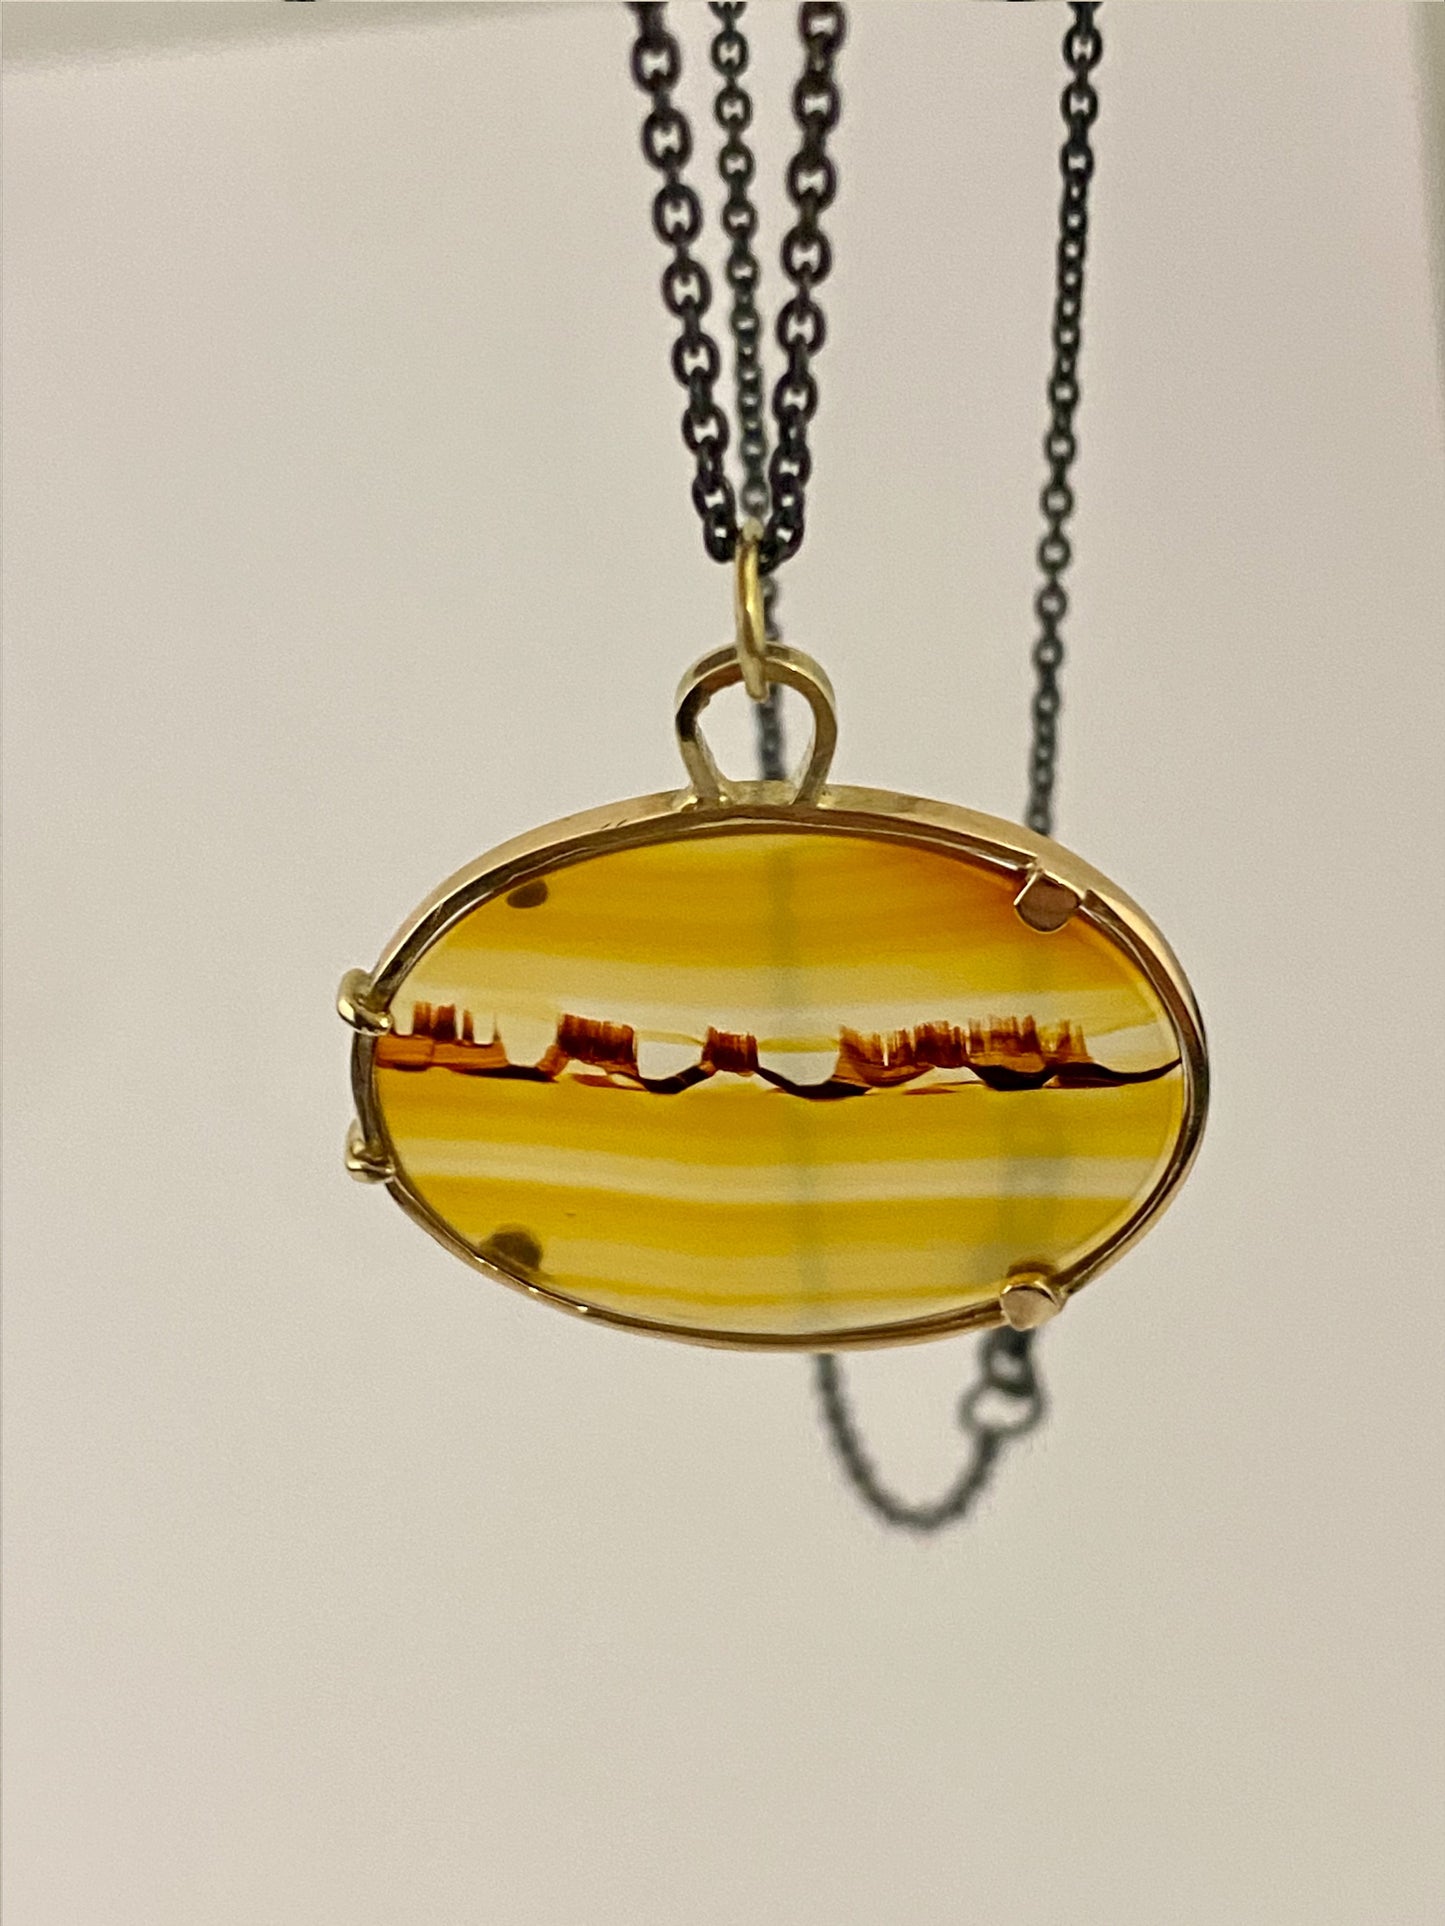 Dendrite agate landscape in 14k gold setting with silver chain